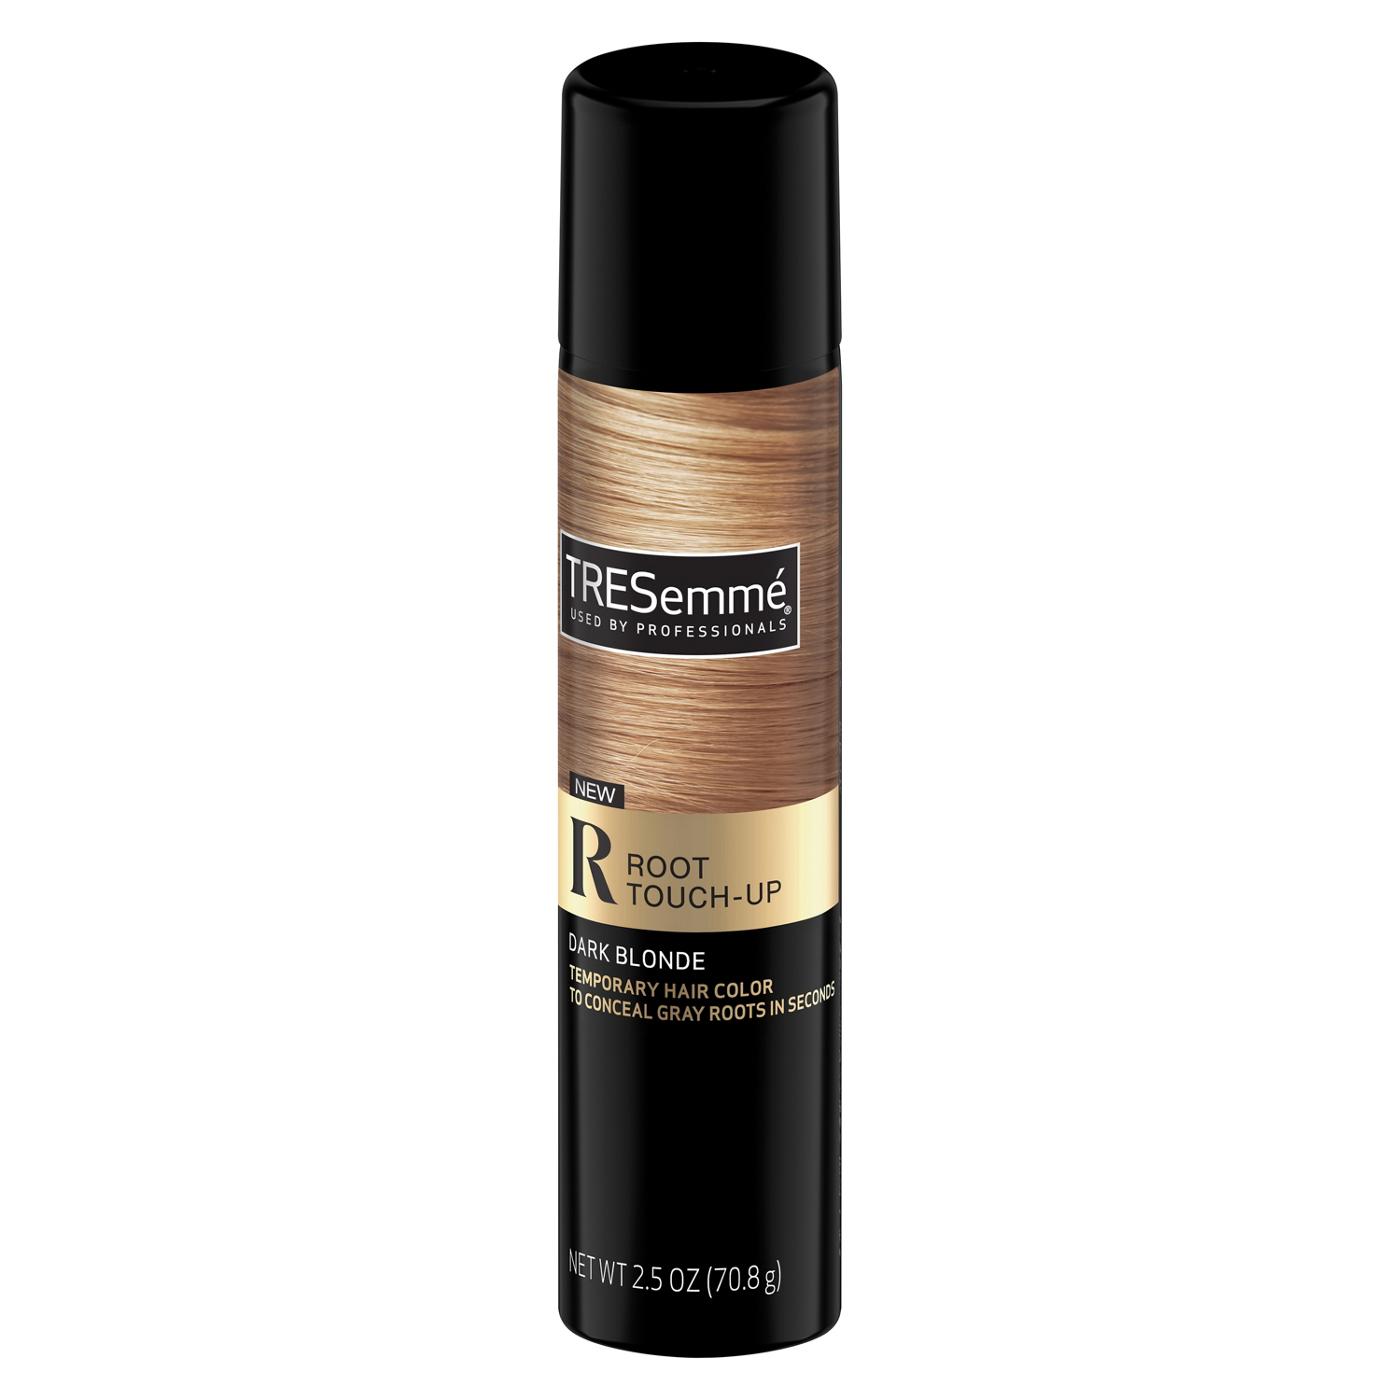 TRESemmé Root Touch Up Temporary Hair Color - Dark Blonde; image 1 of 4